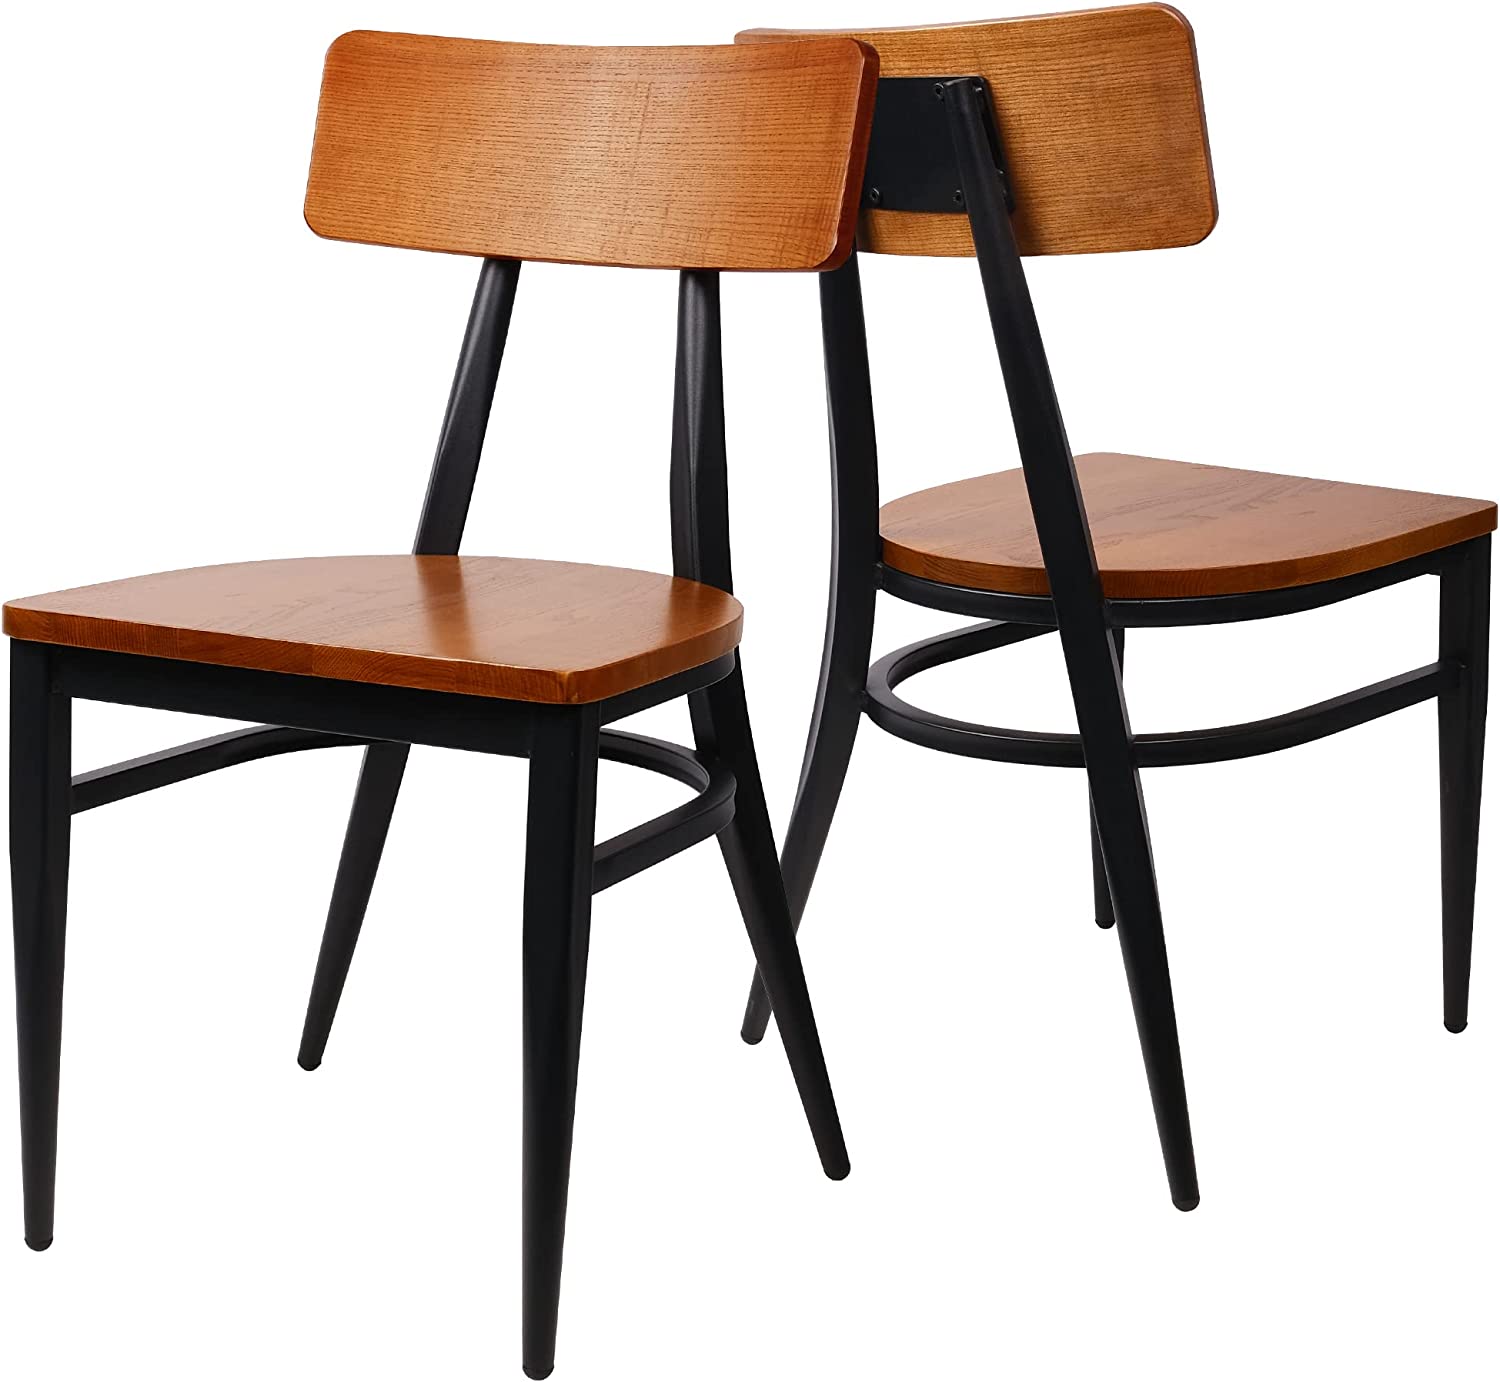 (Out of stock) Modern Industrial Kitchen Dining Chairs Set of 2 with Solid Wooden Seat & Metal Legs